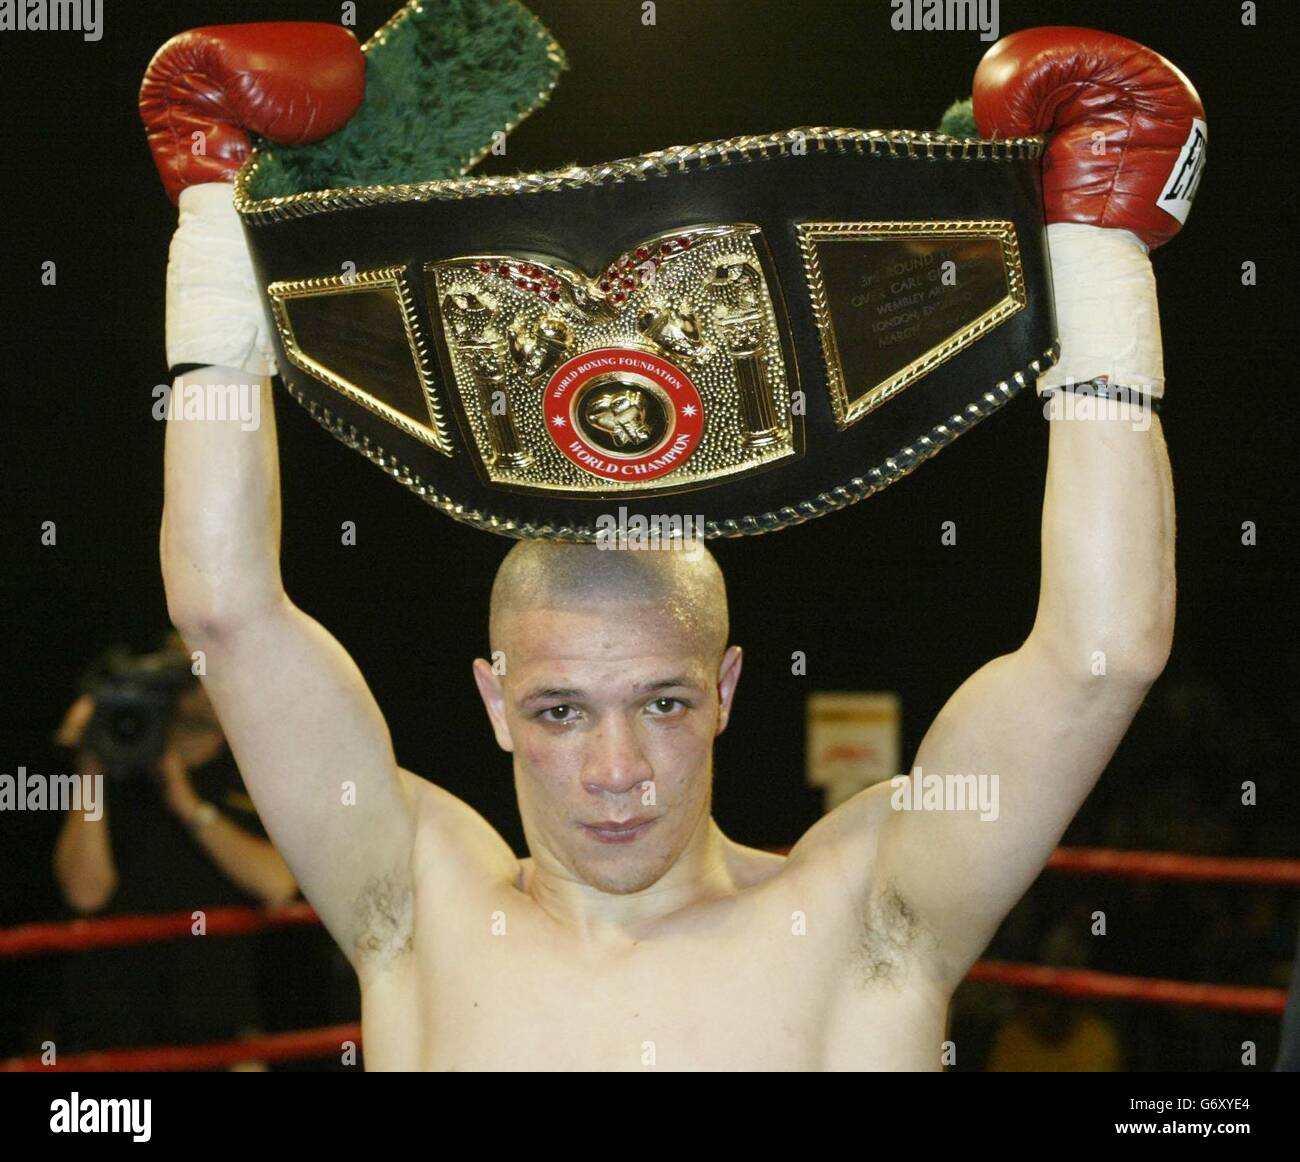 Carl 'Bo' Johanneson from Leeds (now based in USA) lifts title belt after his victory over Scotland's Andrew Ferrans in their WBF World Super Featherweight Championship at Whitchurch Sports Centre, Bristol. Stock Photo